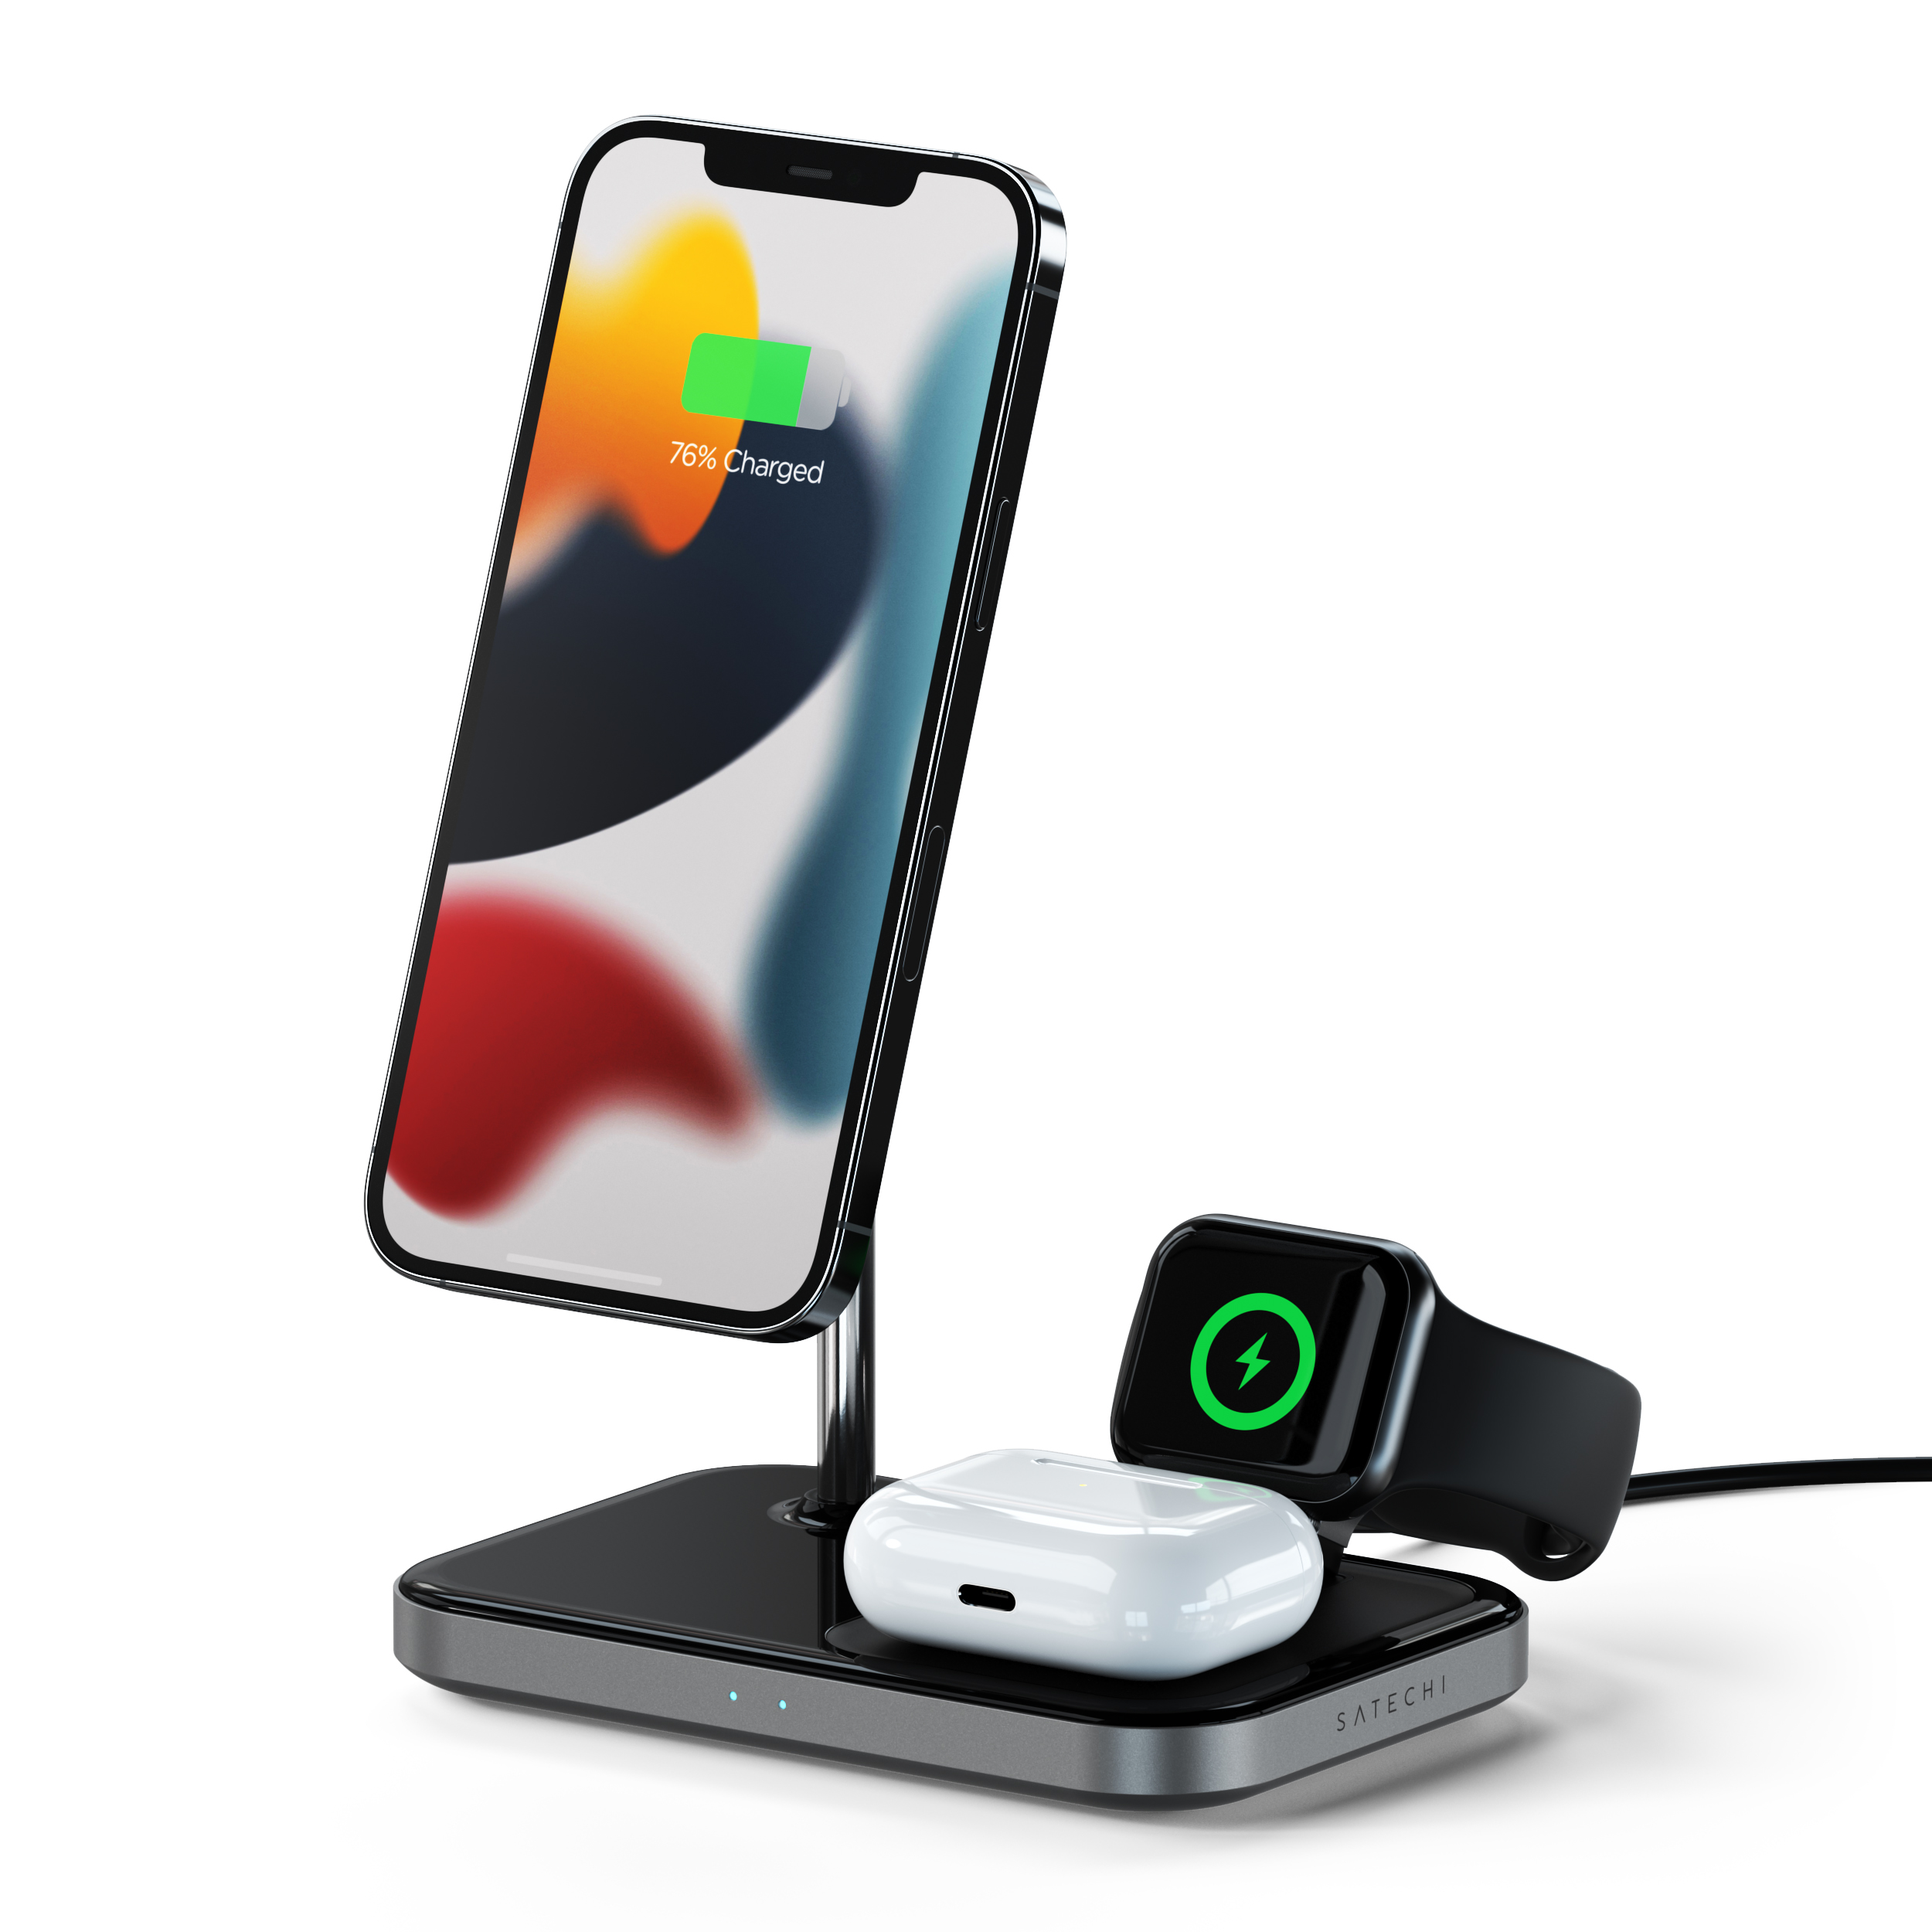 Wireless Wireless Charger Nero 3-in-1 Stand Charging SATECHI Magnetic Satechi,